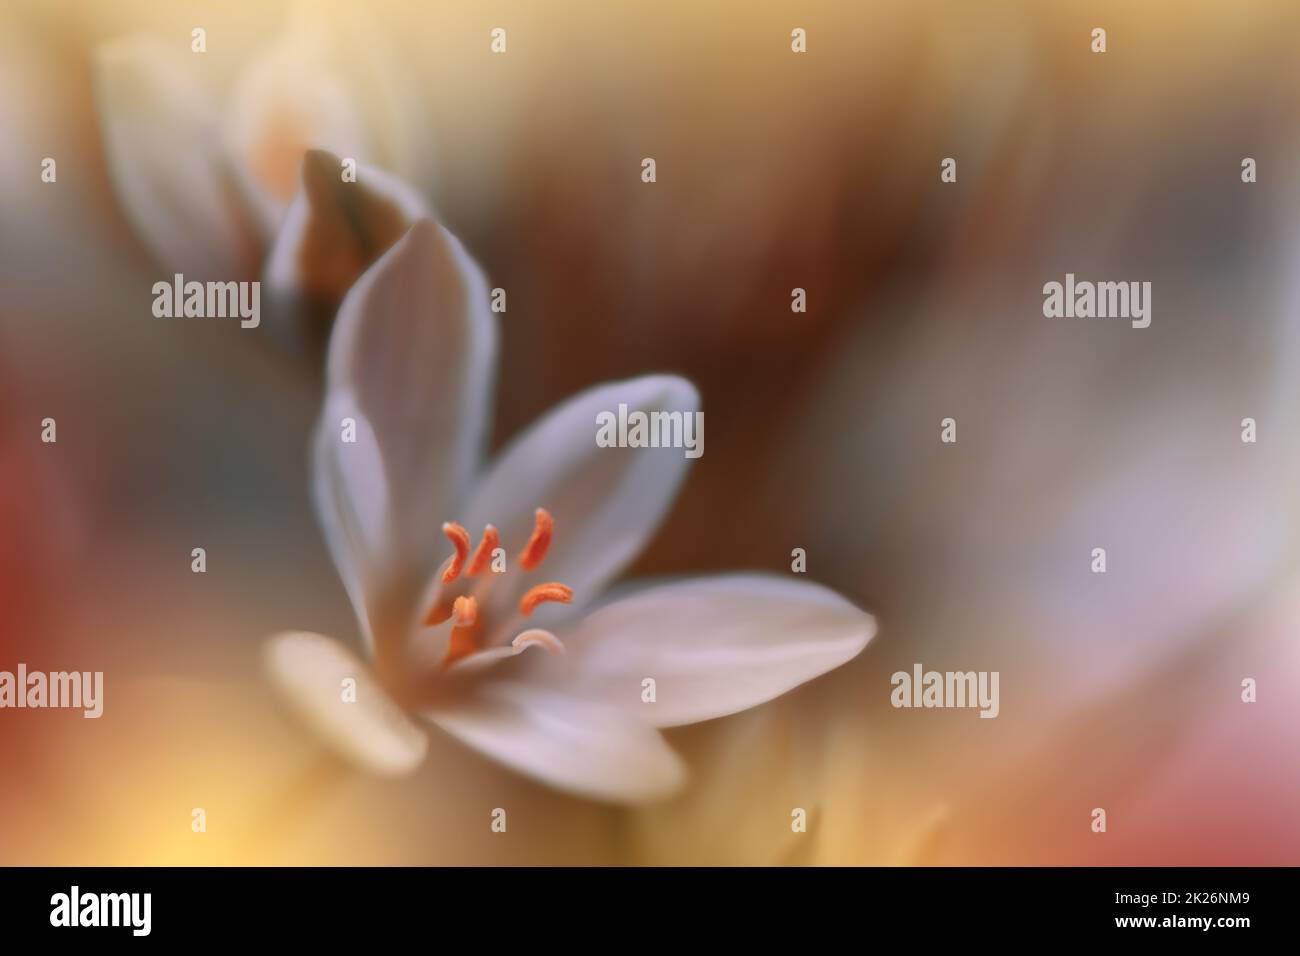 Beautiful Macro Photo.Magic Flowers.Border Art Design. Extreme Close up Photography.Conceptual Abstract Image.Golden Background.Fantasy Art.Creative Wallpaper.Beautiful Nature Background.Amazing Spring White Flower.Copy Space.Wedding Invitation. Stock Photo